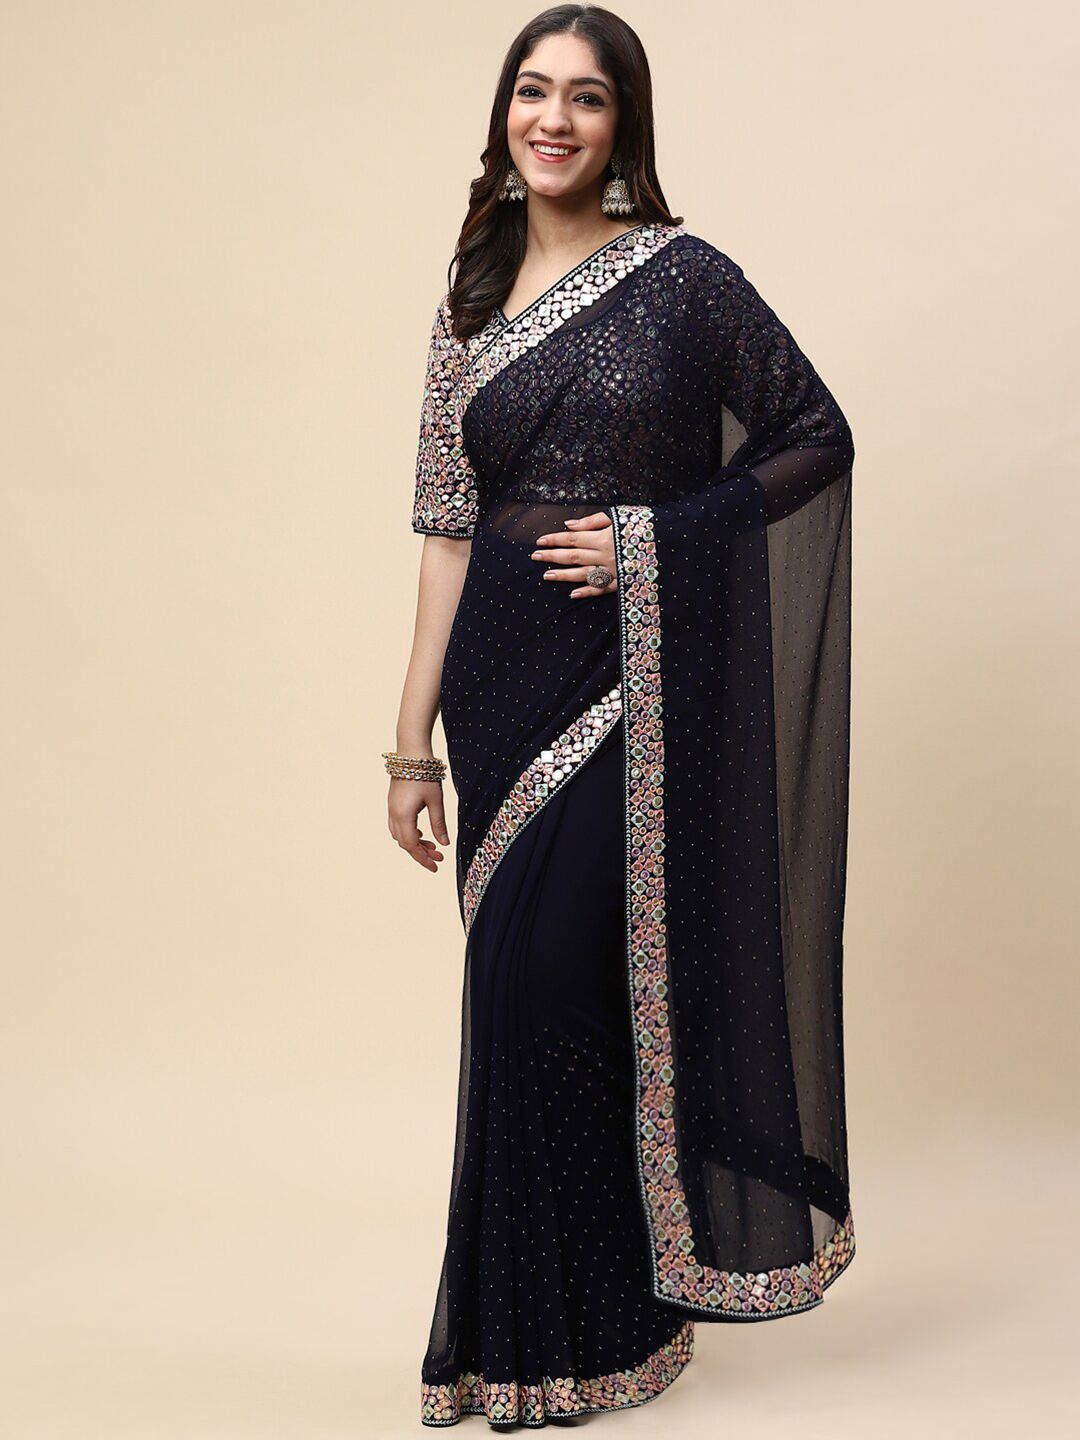 Meena Bazaar Navy Blue & White Embellished Embroidered Beads and Stones Saree Price in India